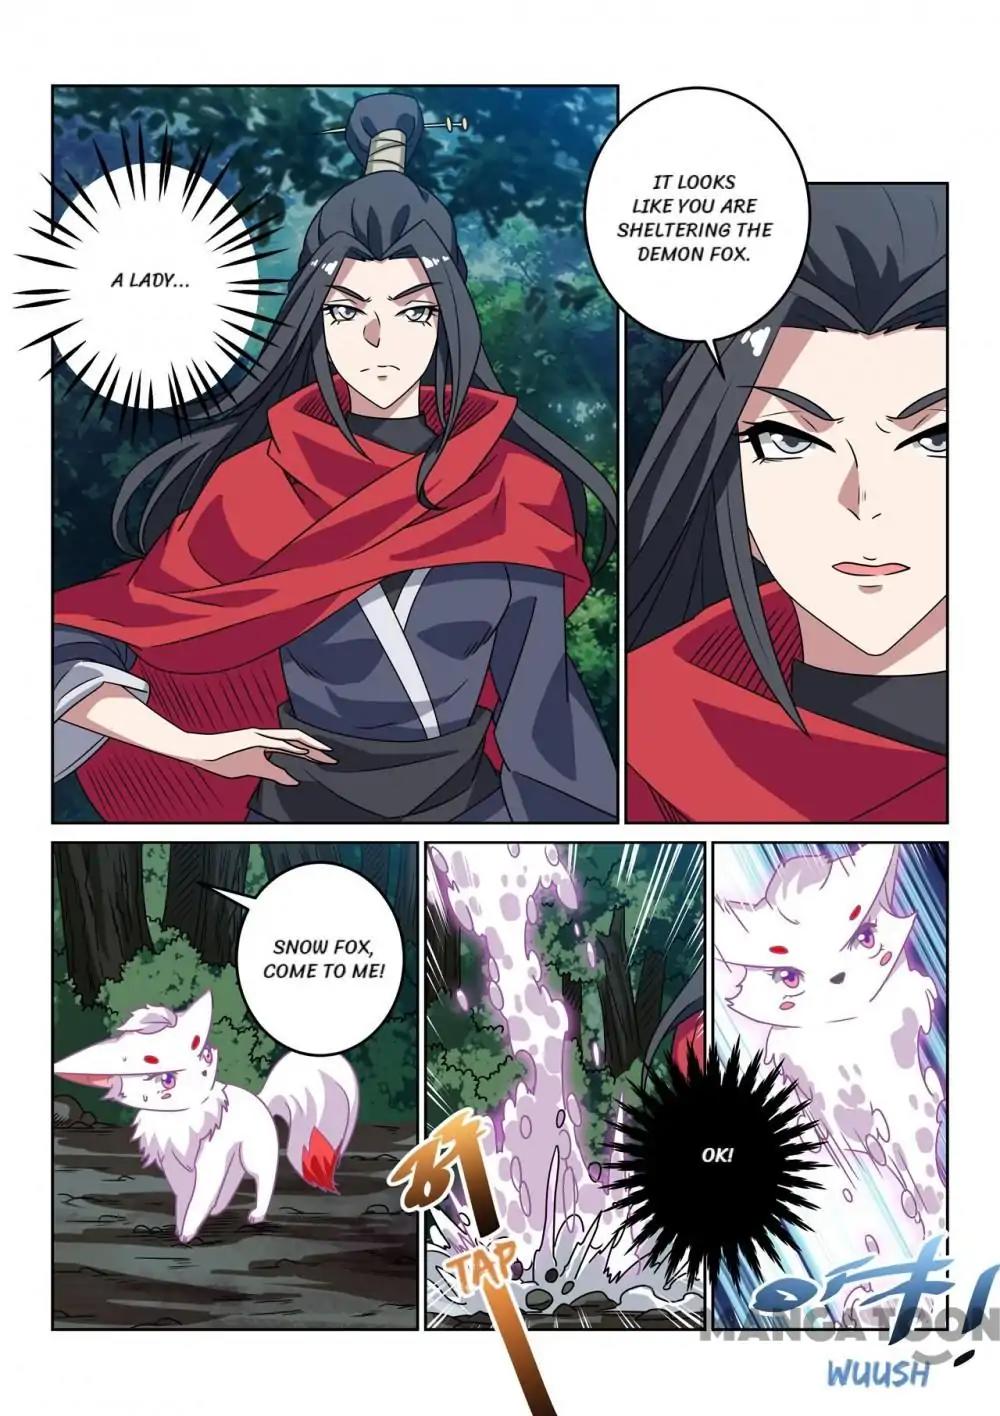 Incomparable Demon King Episode 132